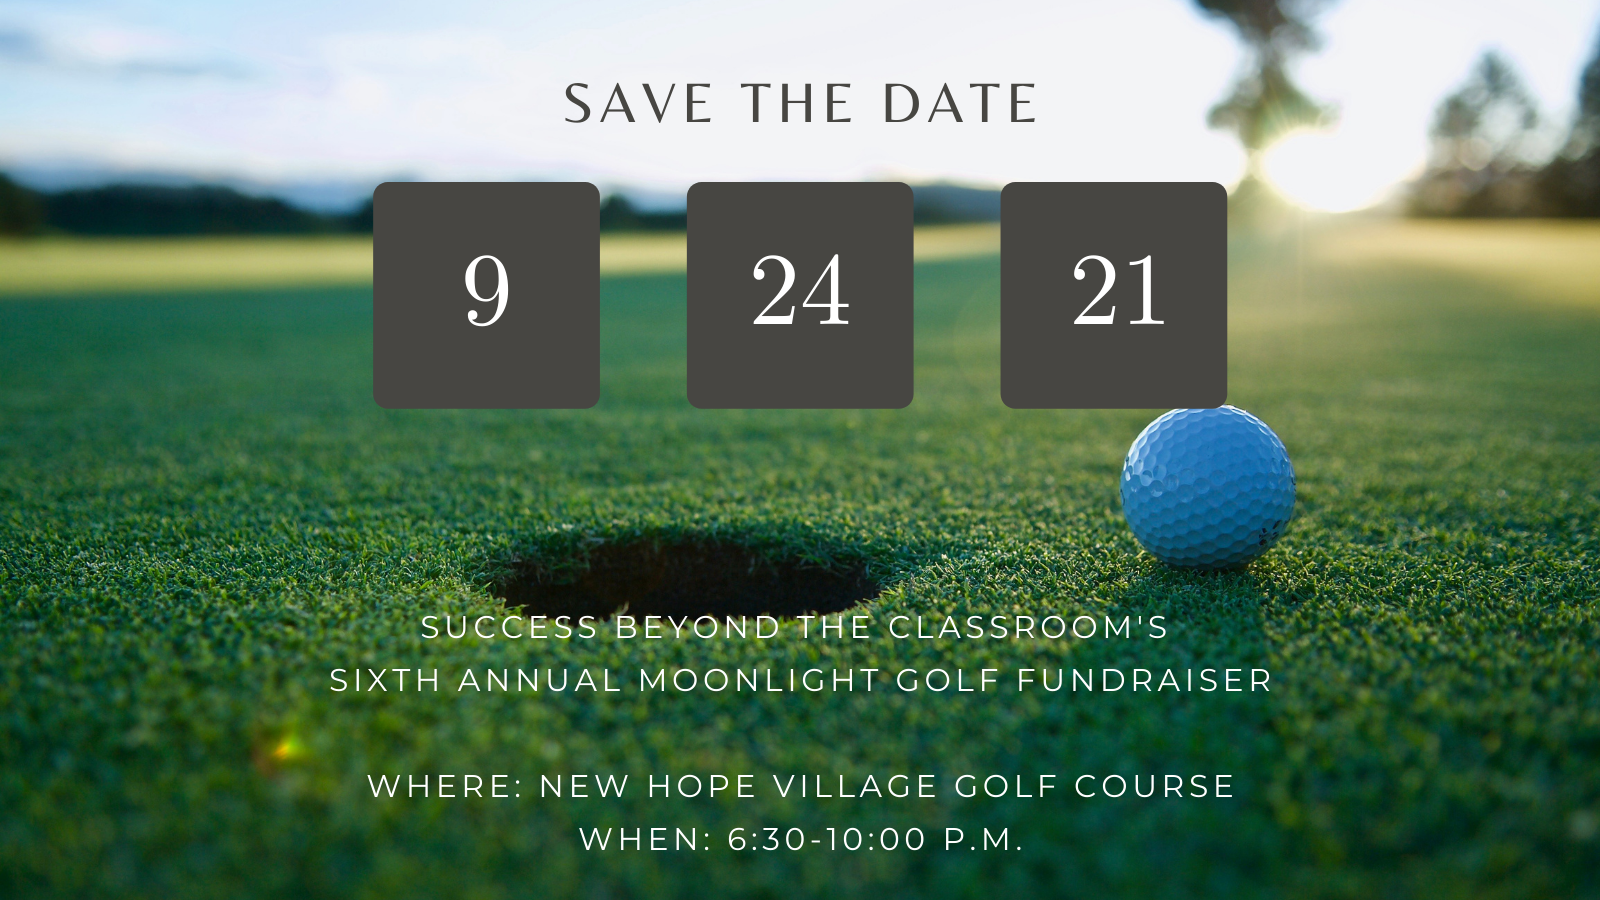 Save the date - moonlight golf